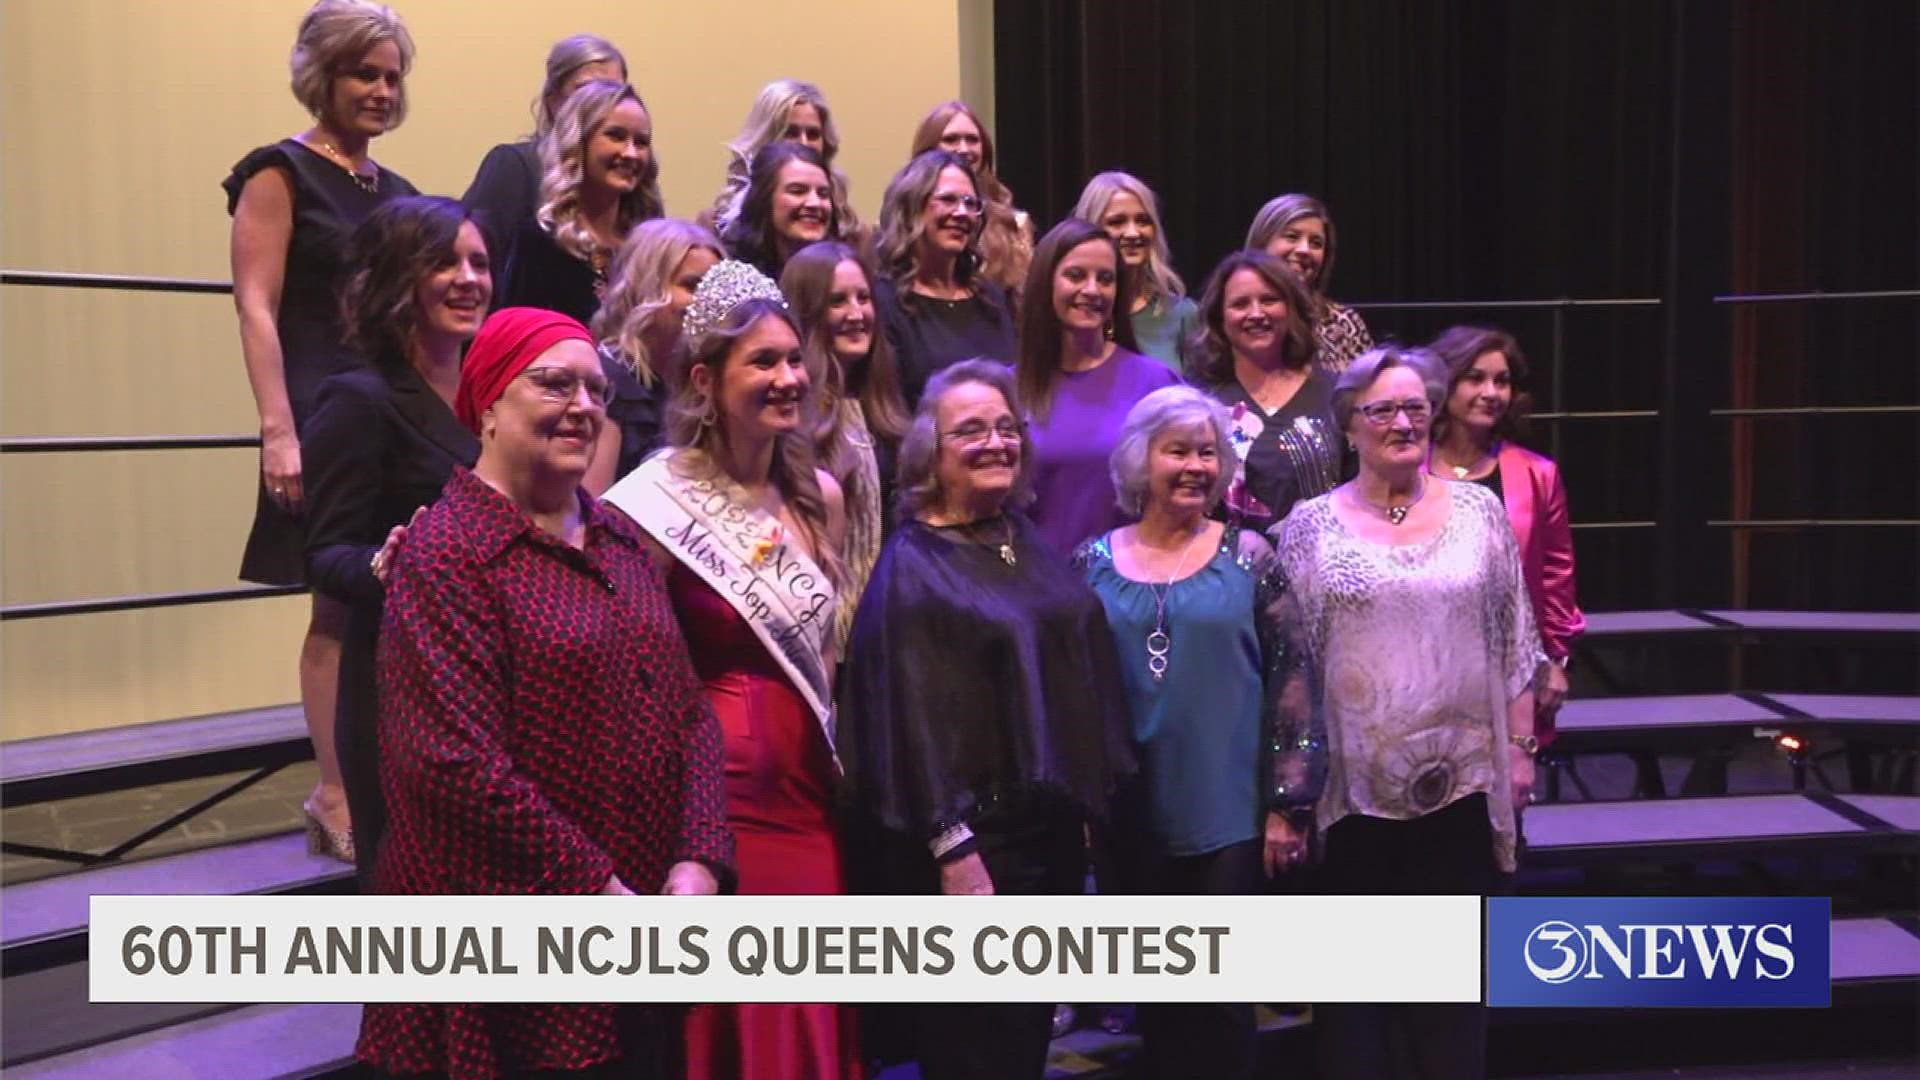 The Queens Contest helps kick off the 88th Annual Nueces County Livestock Show.